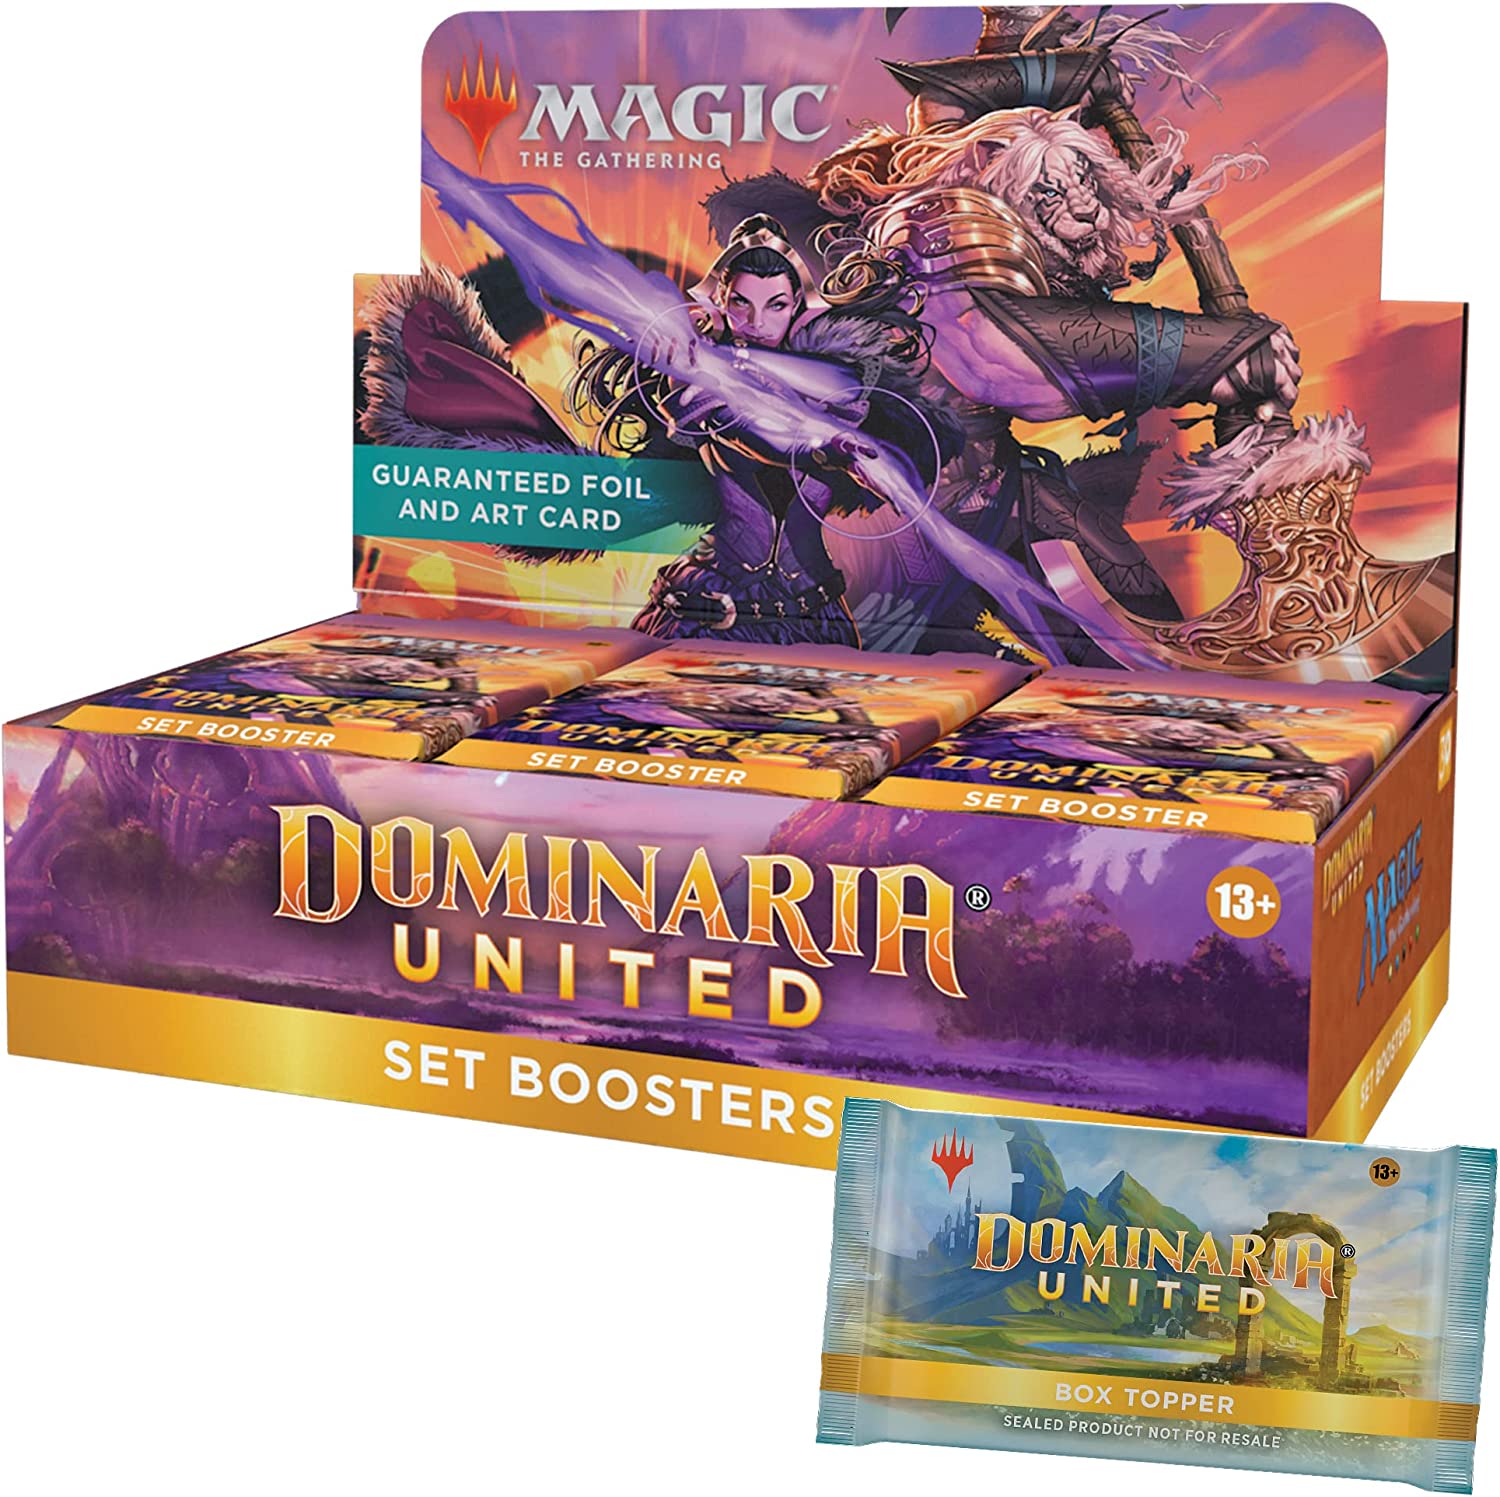 Magic: The Gathering Dominaria United Set Booster Box | CCGPrime